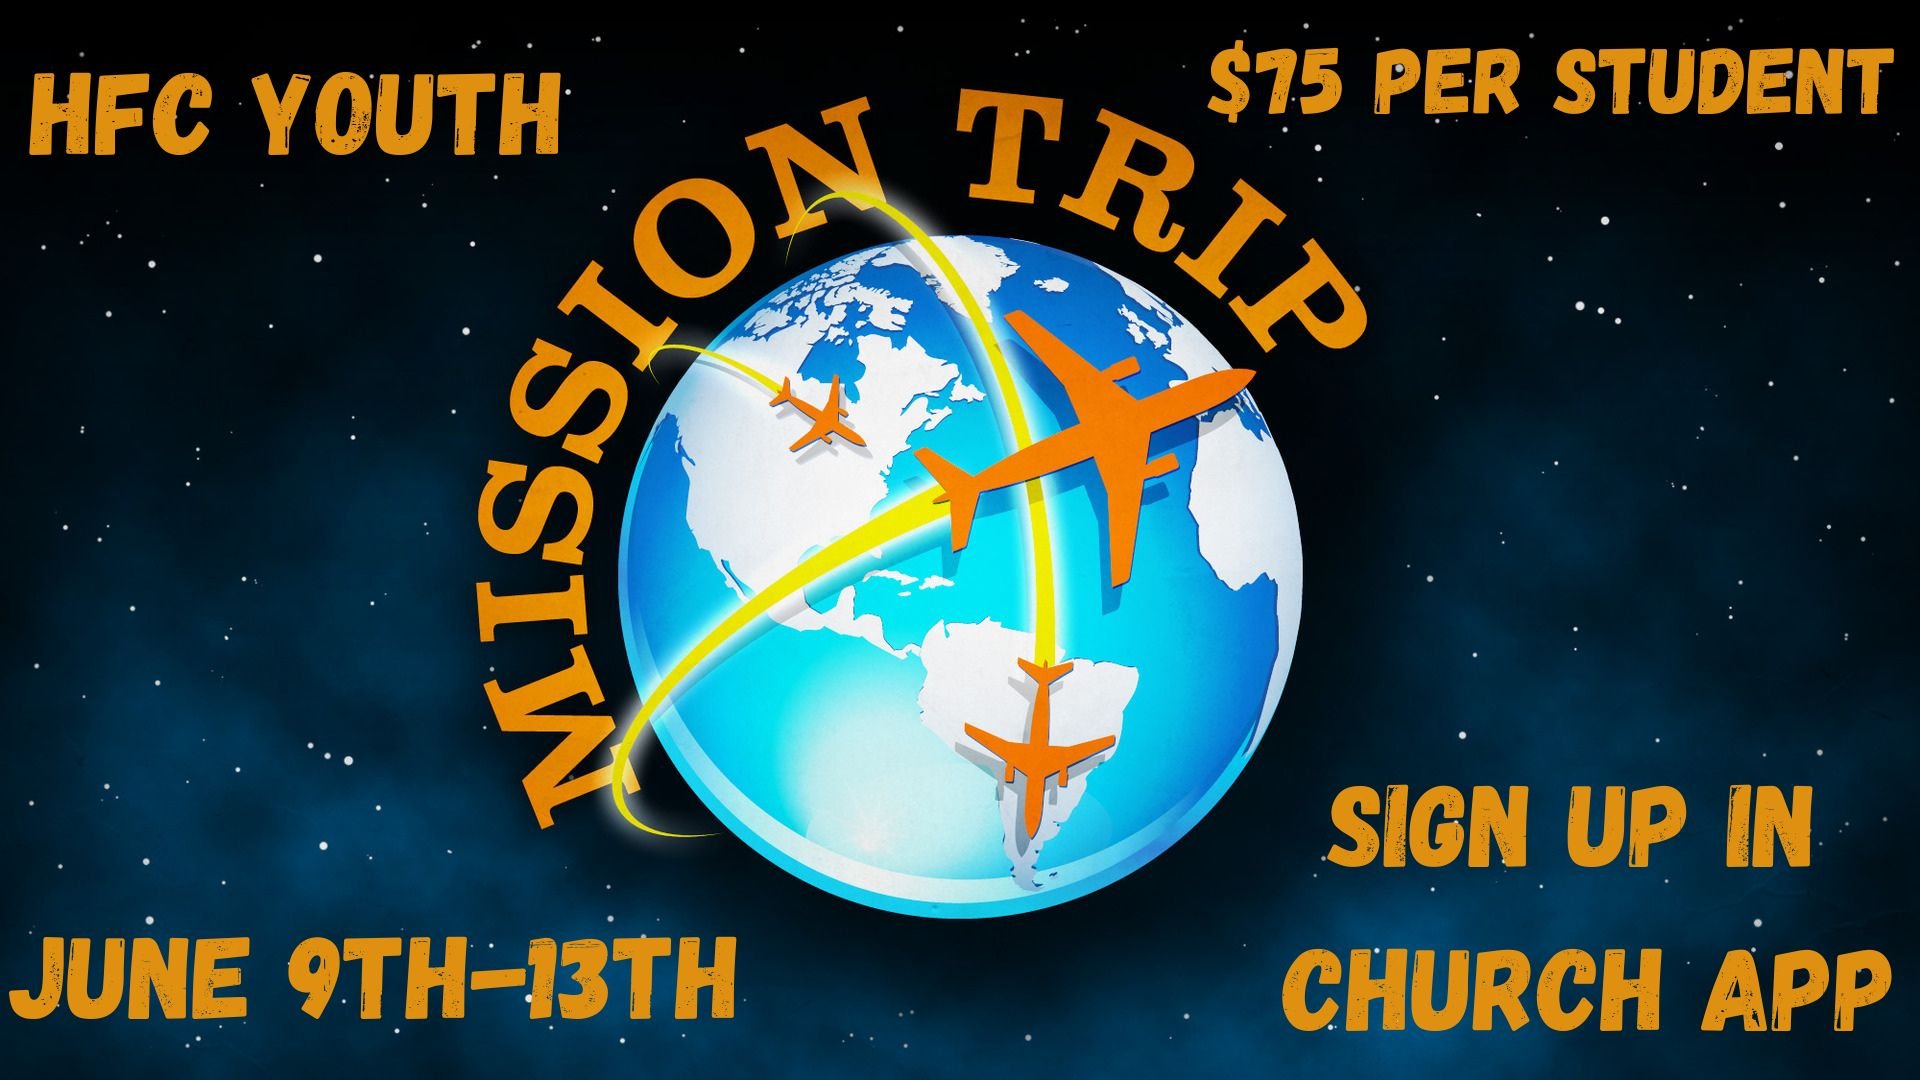 ATTENTION PARENTS, our HFC Youth mission trip is coming up soon. It will be June 9th through 13th. Cost is $75. If your student is interested, get them registered in the church app. 

https://hilltopfamily.churchcenter.com/reg.../events/2264461